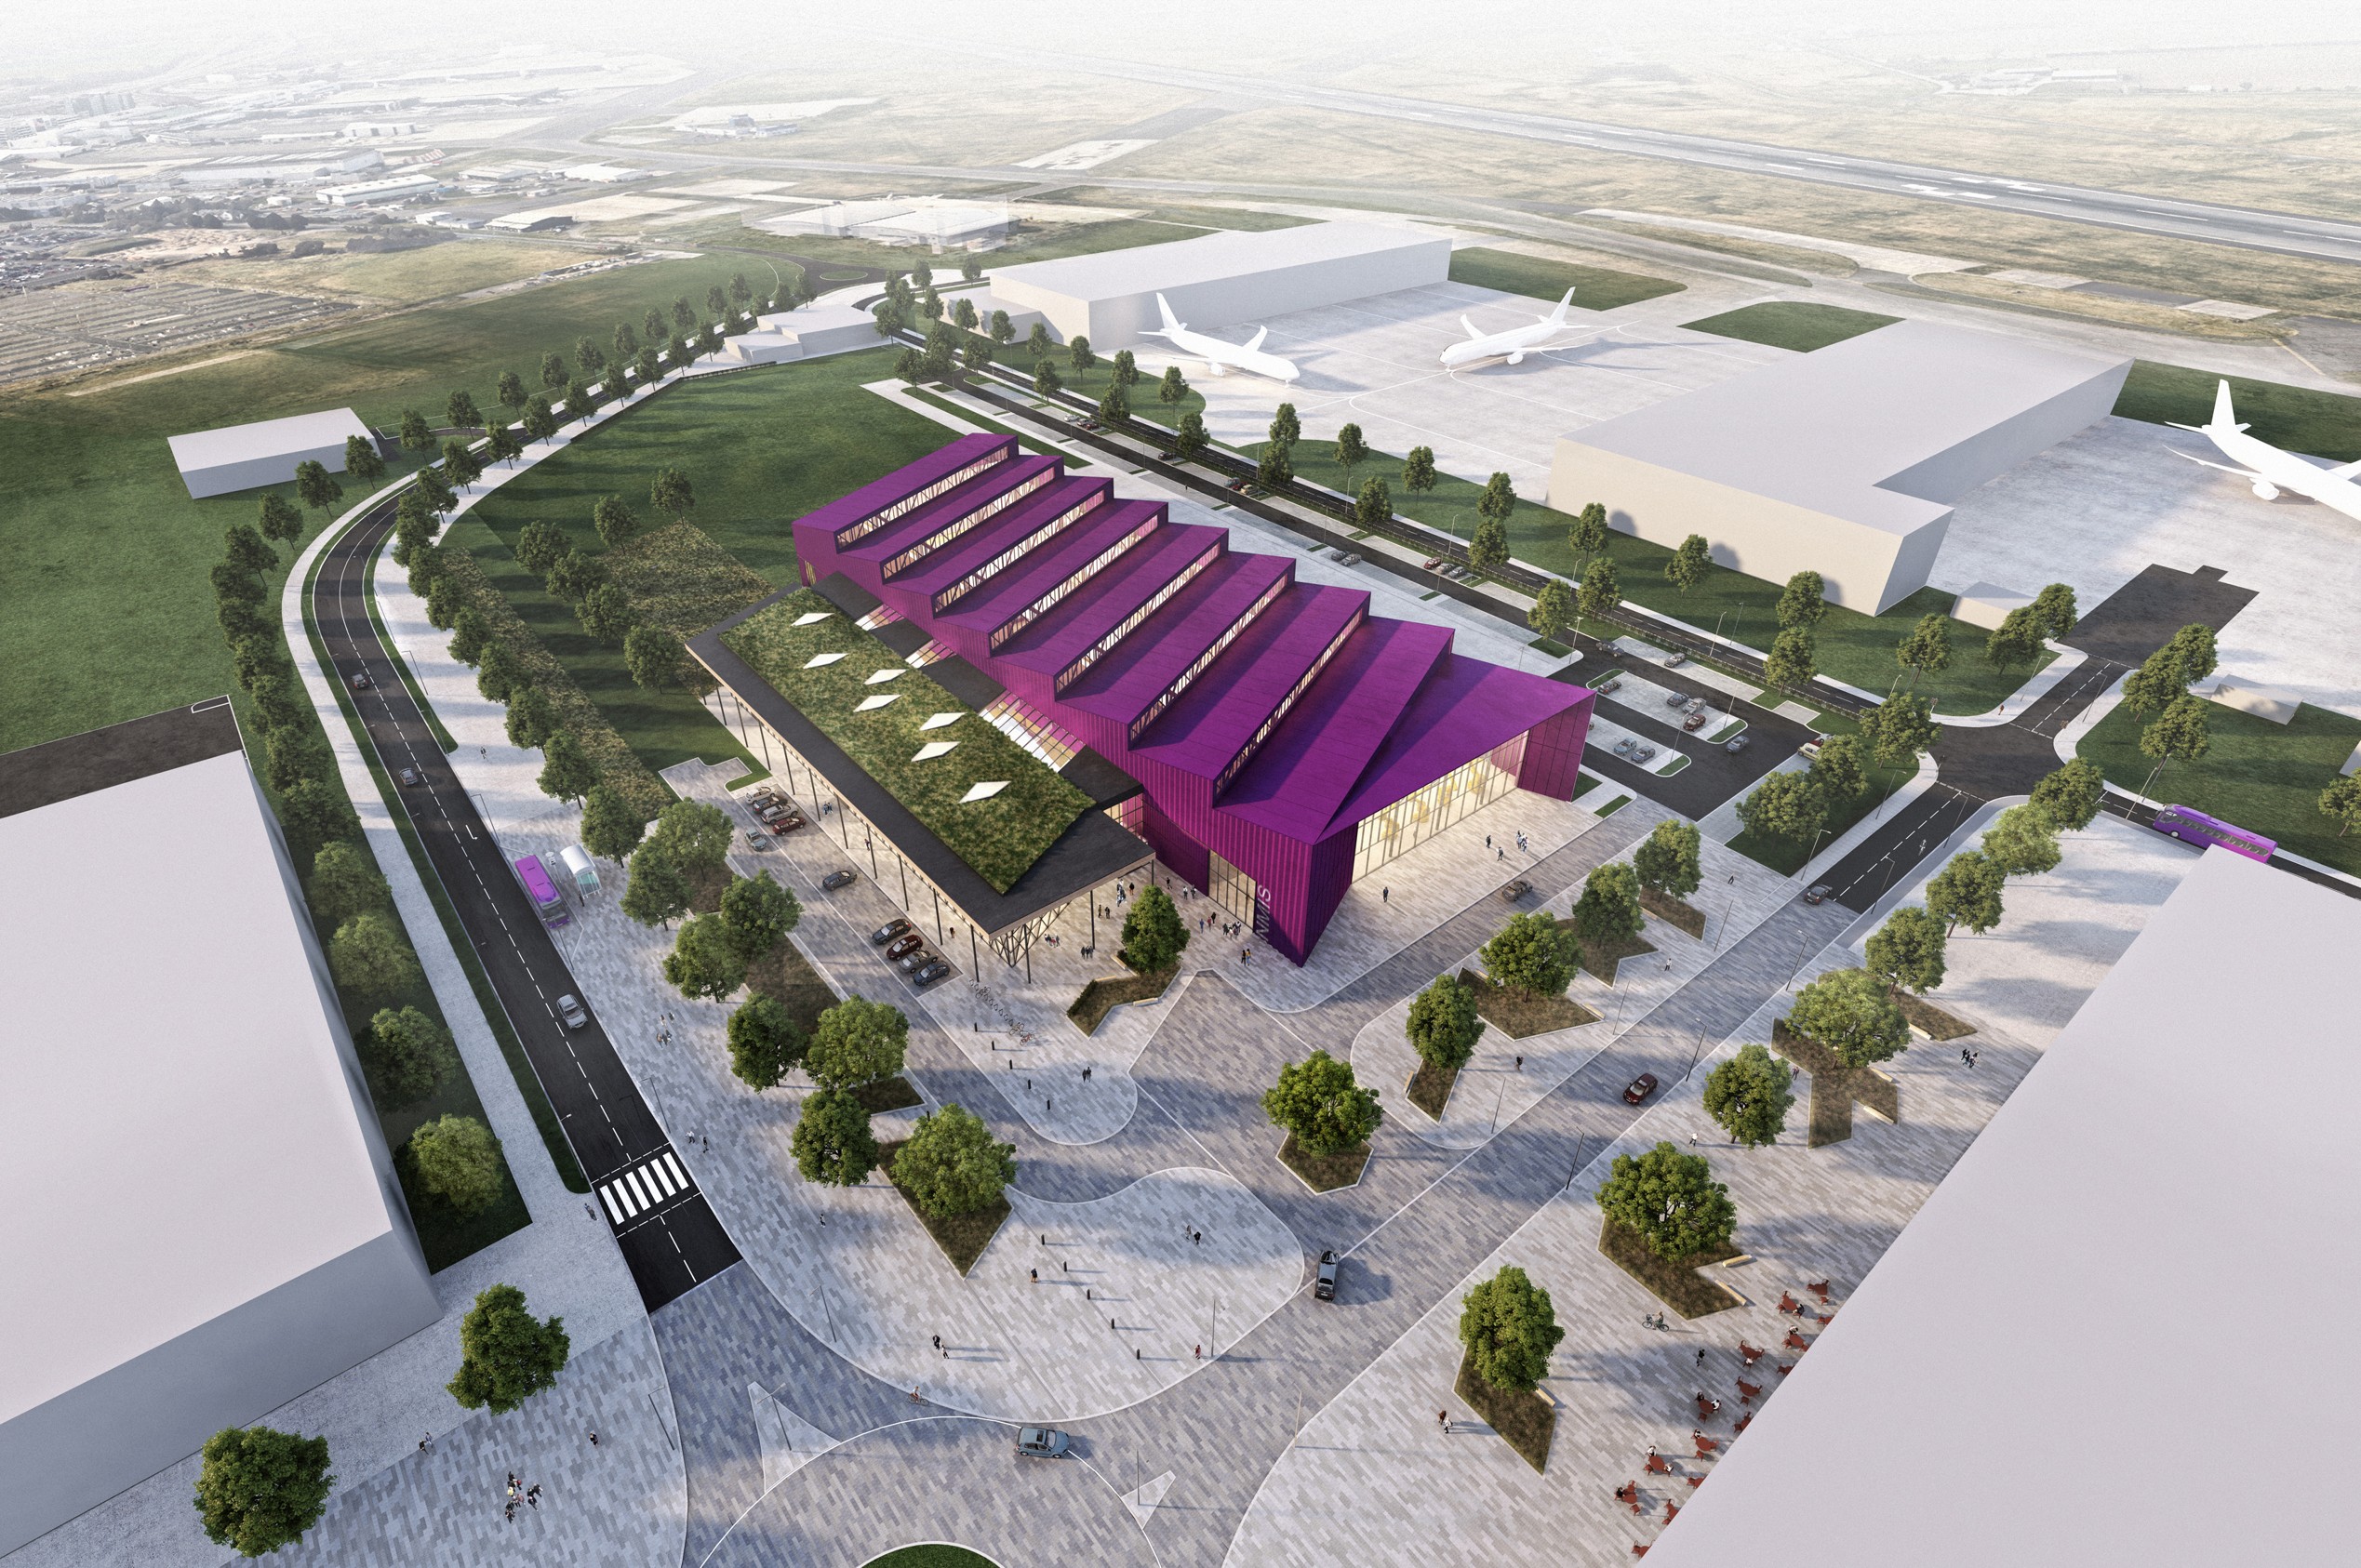 New National Manufacturing Institute Scotland lodged for planning